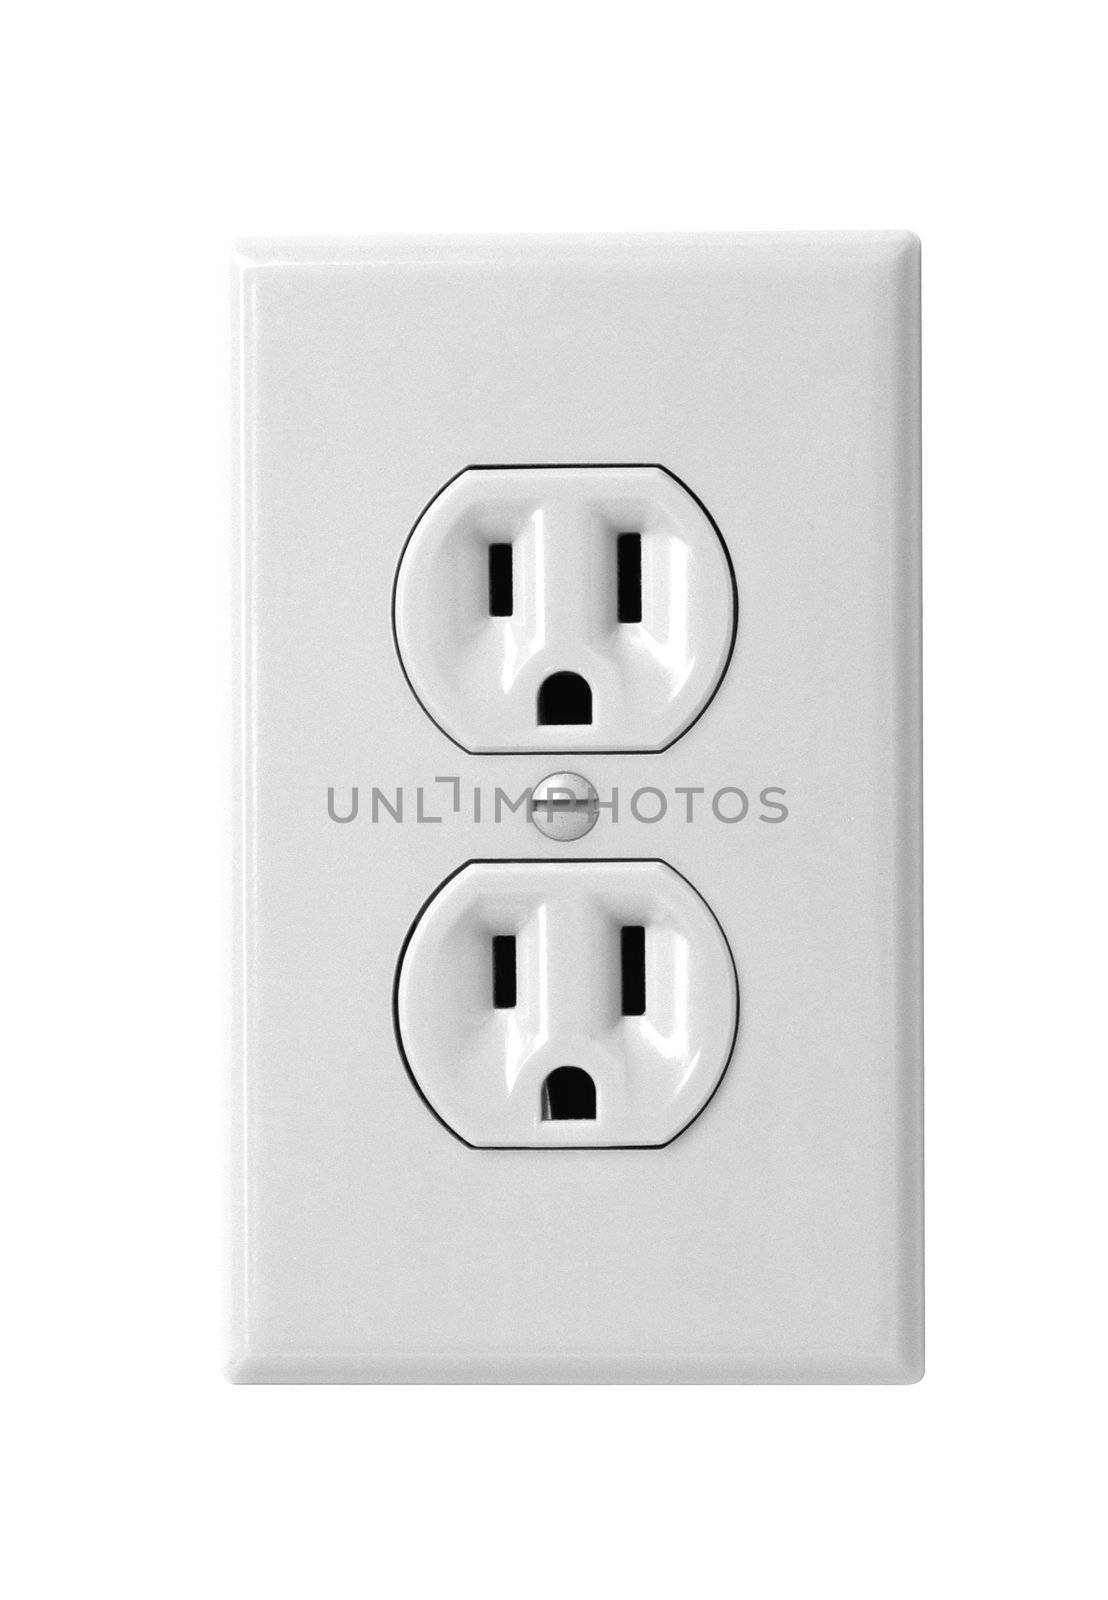 North American white electric wall outlet receptacle for site